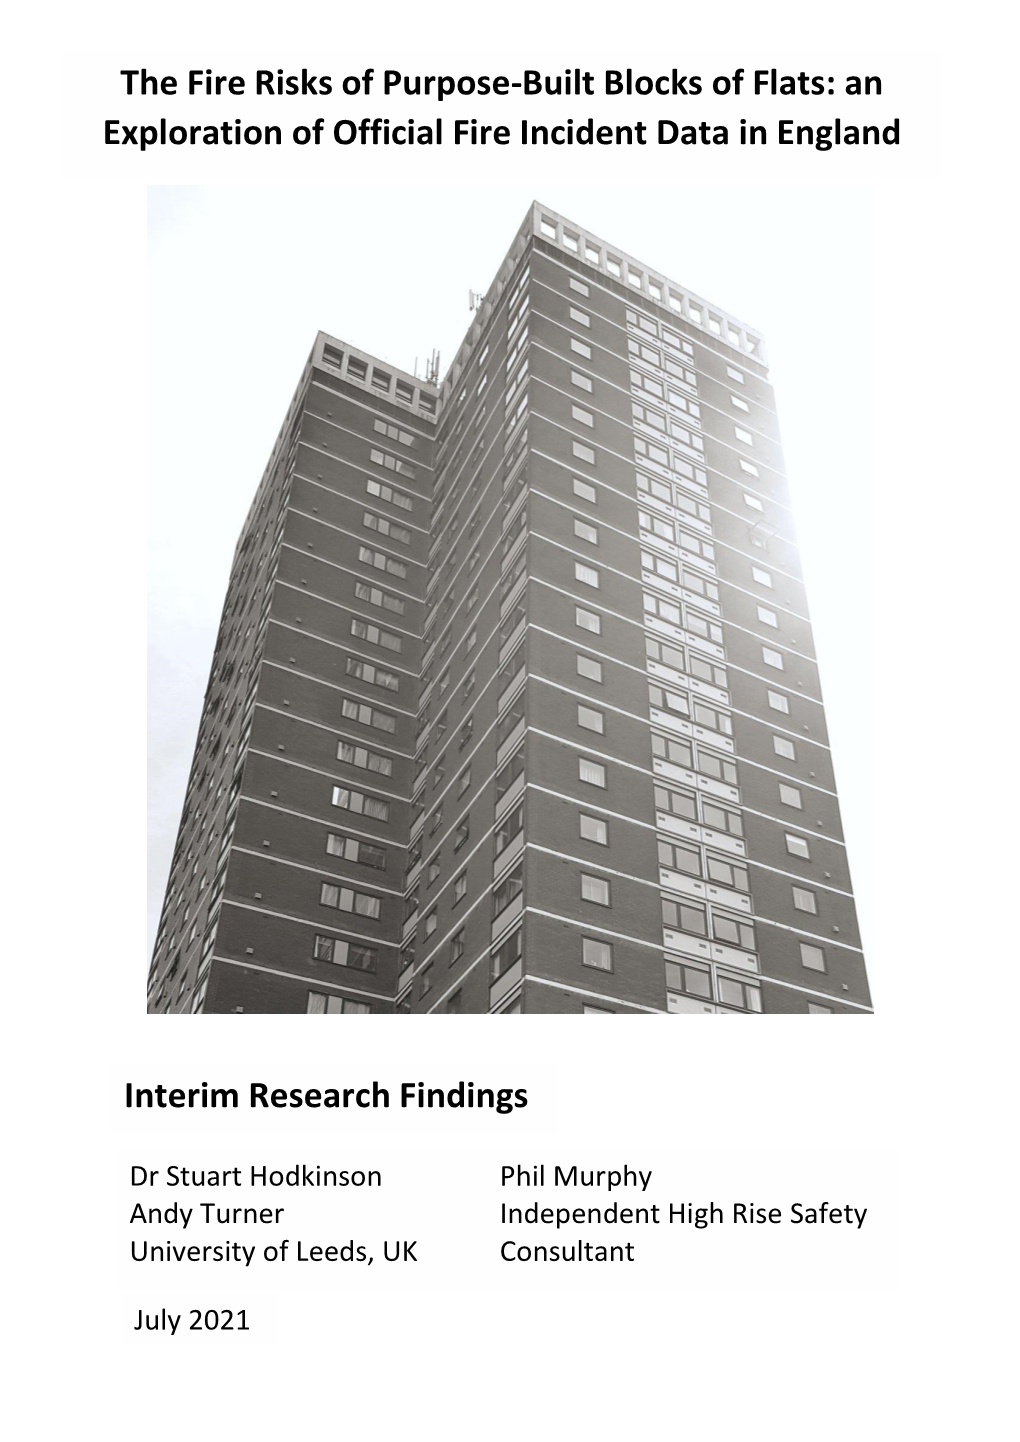 The Fire Risks of Purpose-Built Blocks of Flats: an Exploration of Official